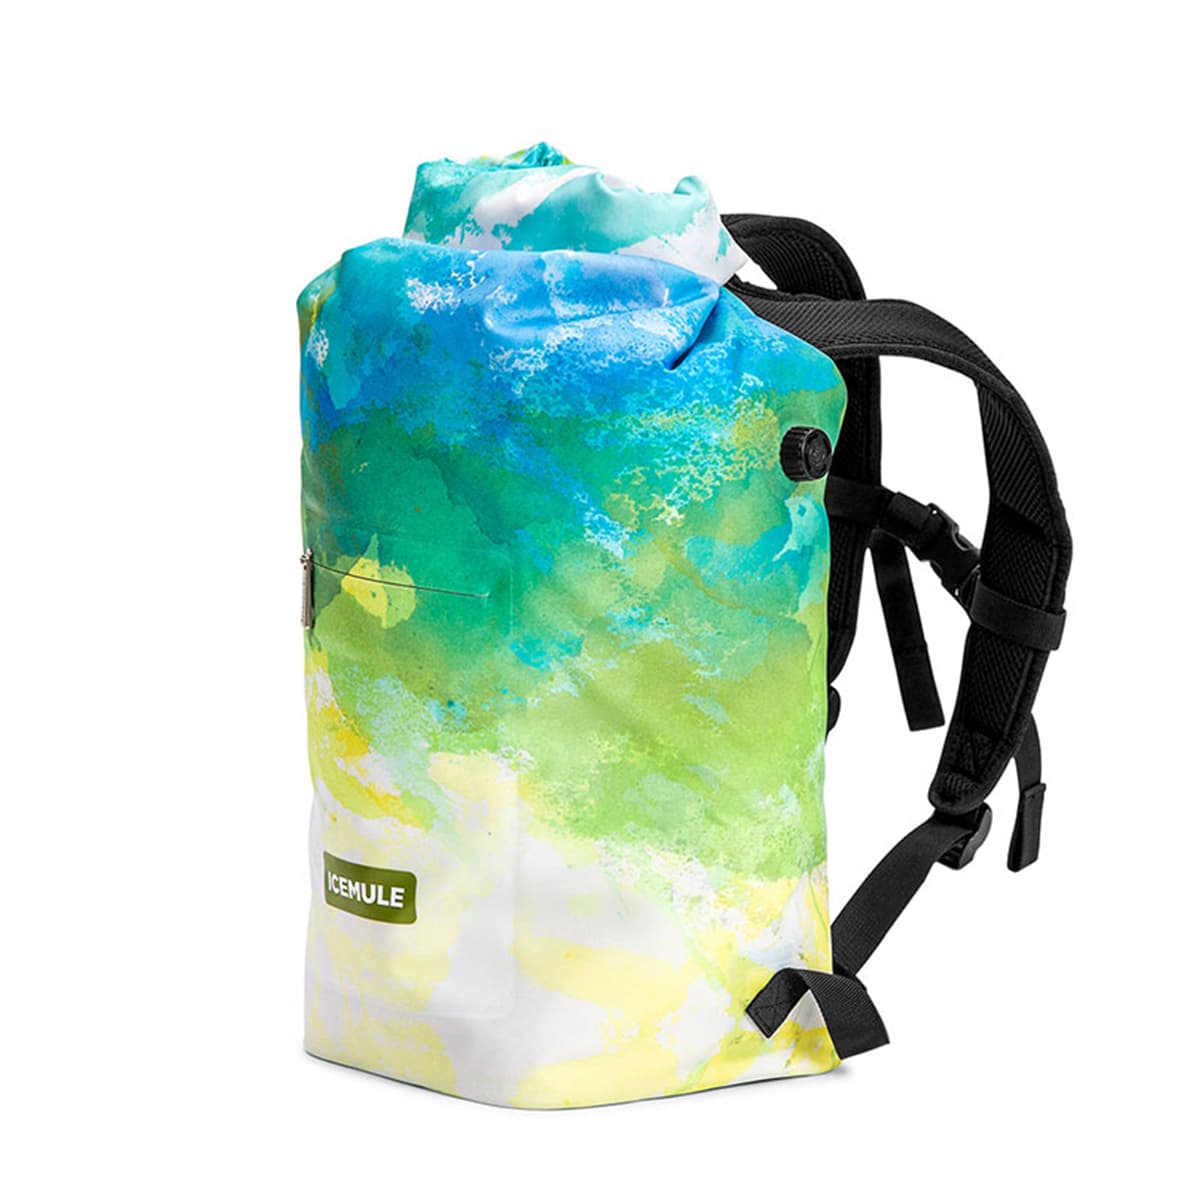 The ICEMULE Jaunt™ 15L Cooler Backpack - ICEMULE Coolers